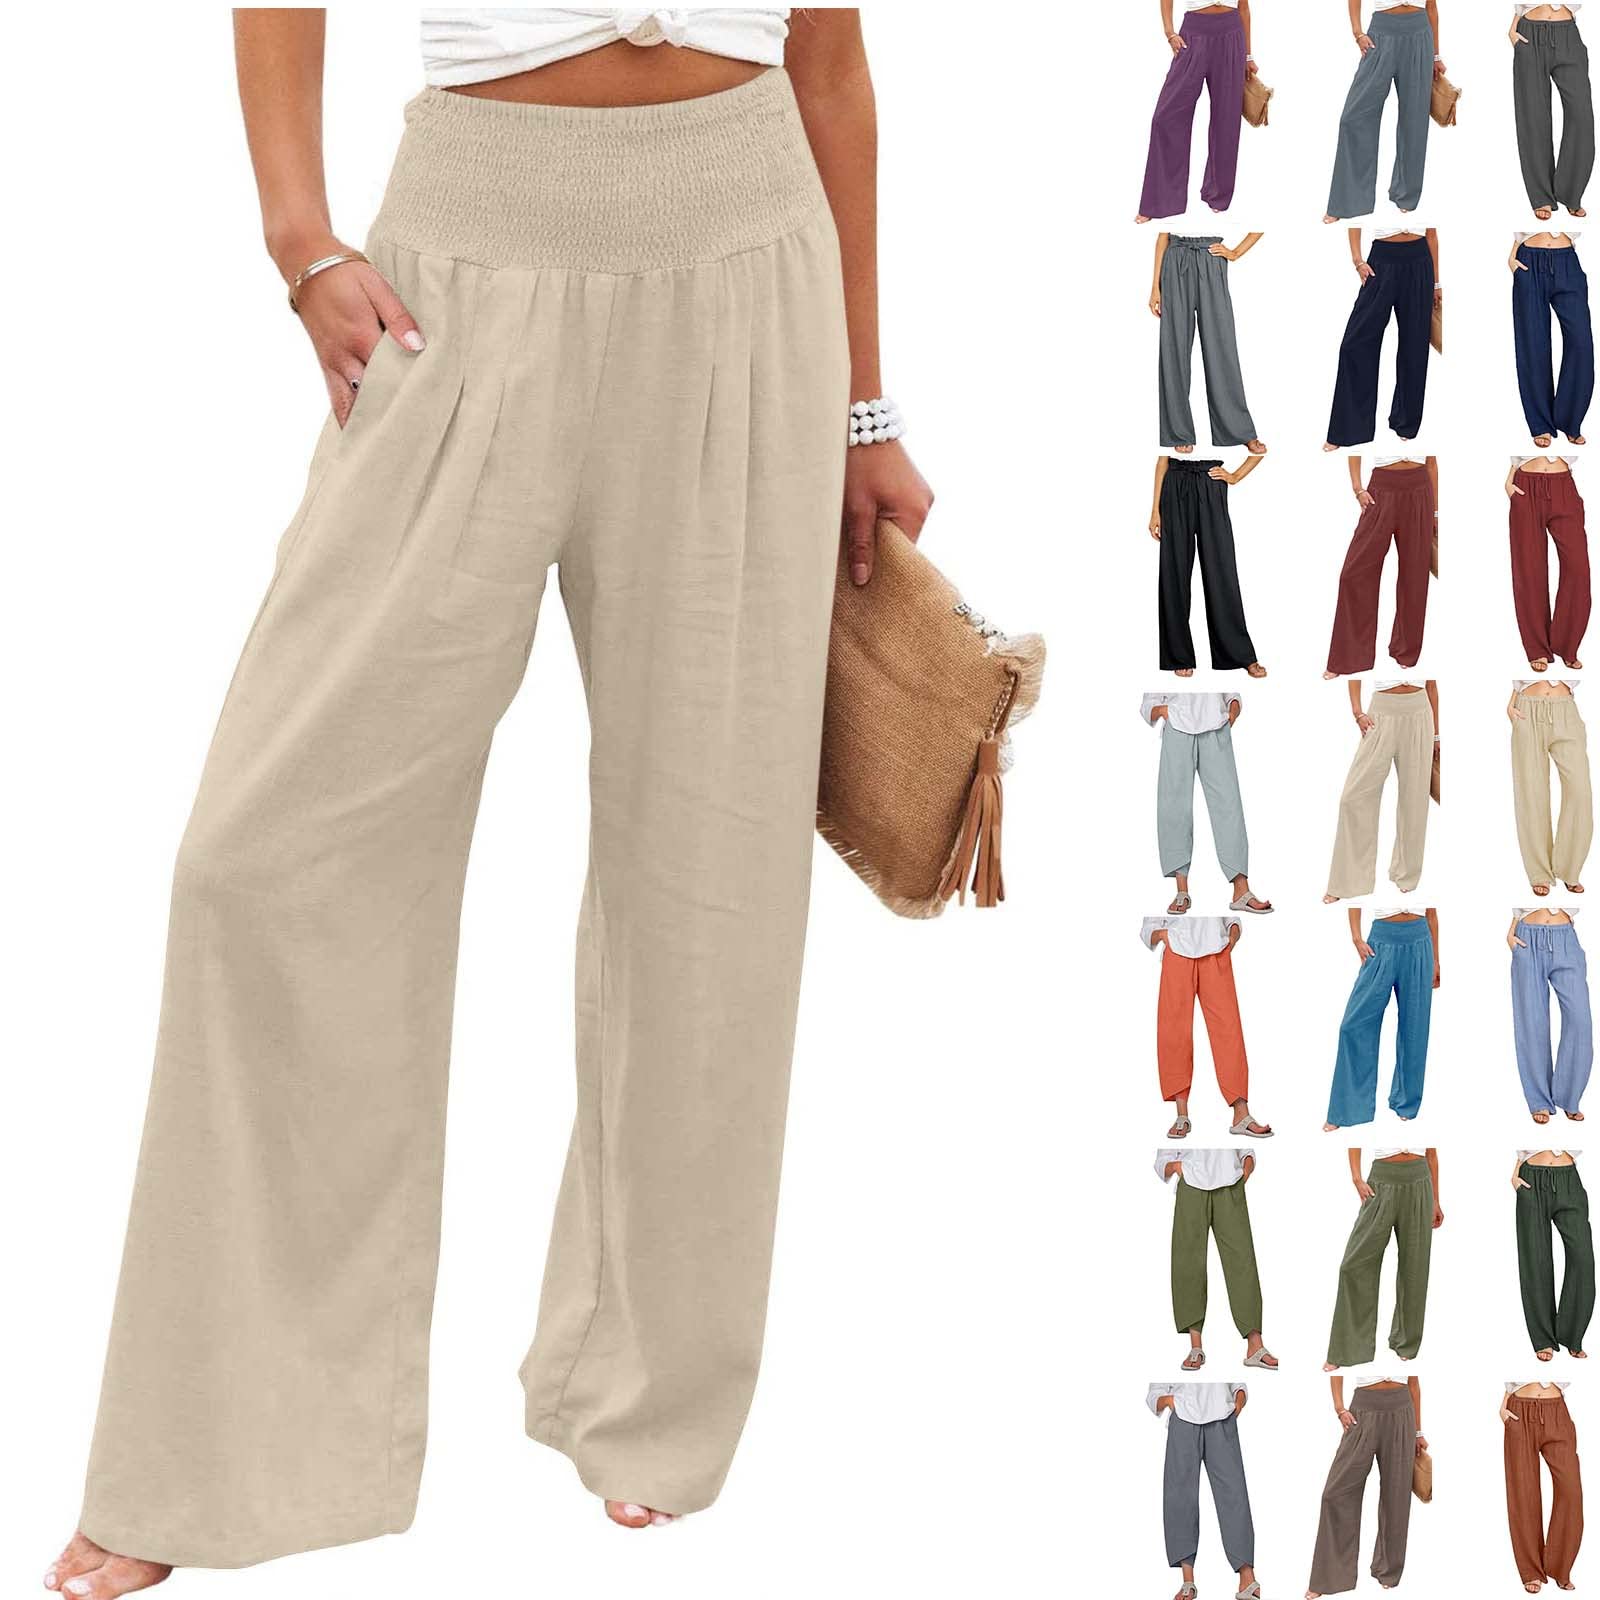 YWDJ Linen Pants for Women High Waist Petite With Pockets High Waist High  Rise Elastic Waist Casual Straight Leg Solid Color Bandage Comfortable  Pants